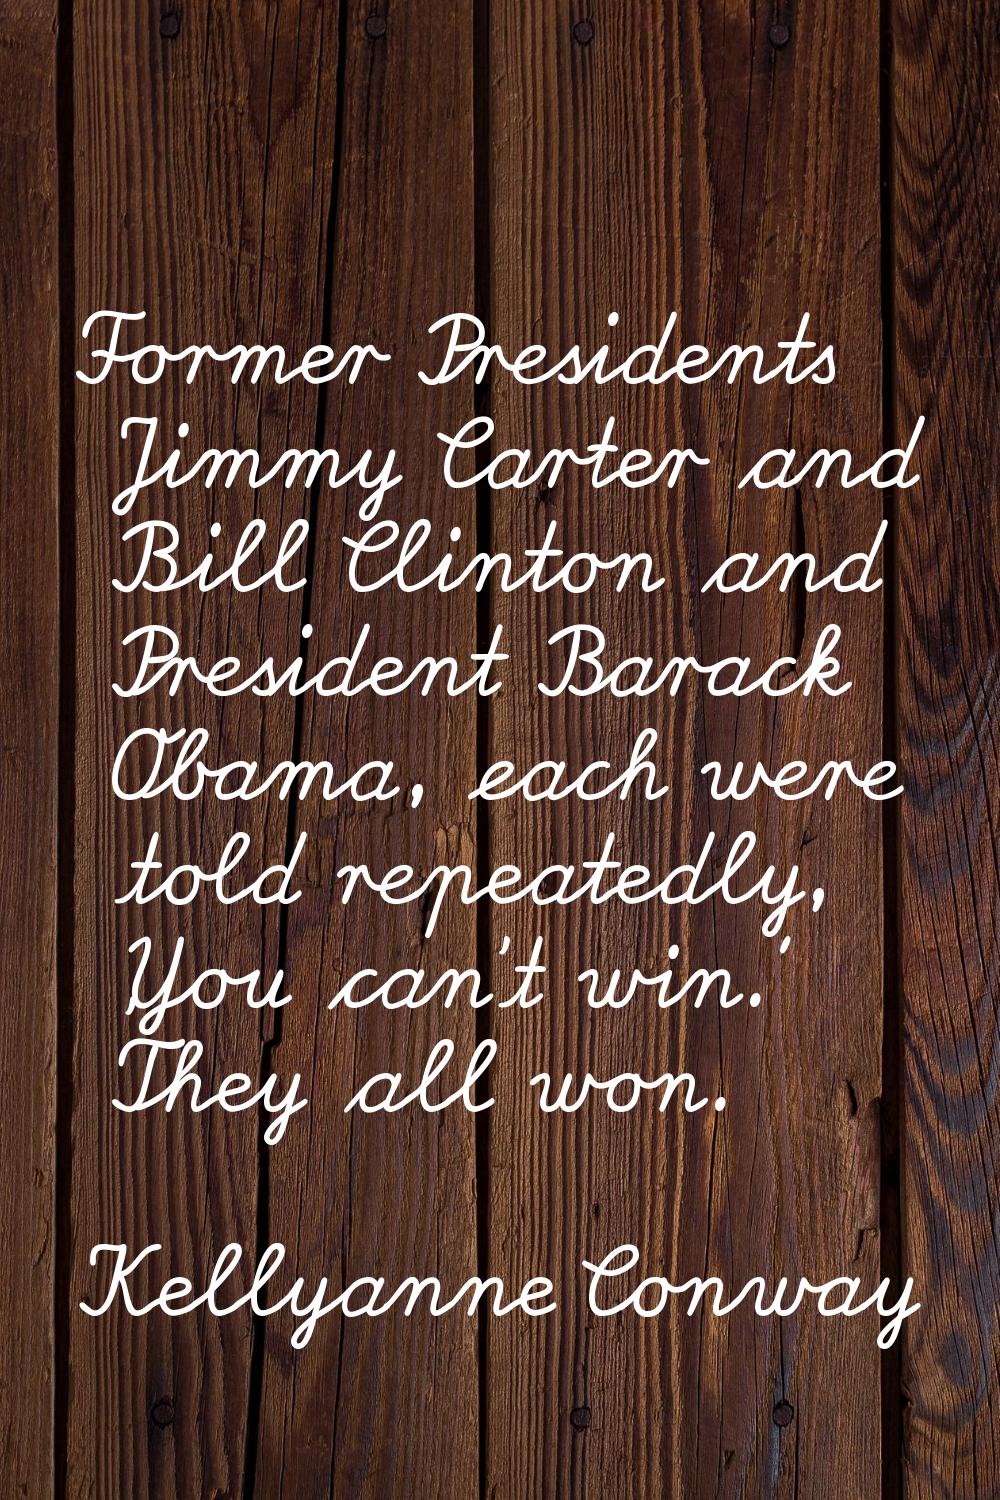 Former Presidents Jimmy Carter and Bill Clinton and President Barack Obama, each were told repeated